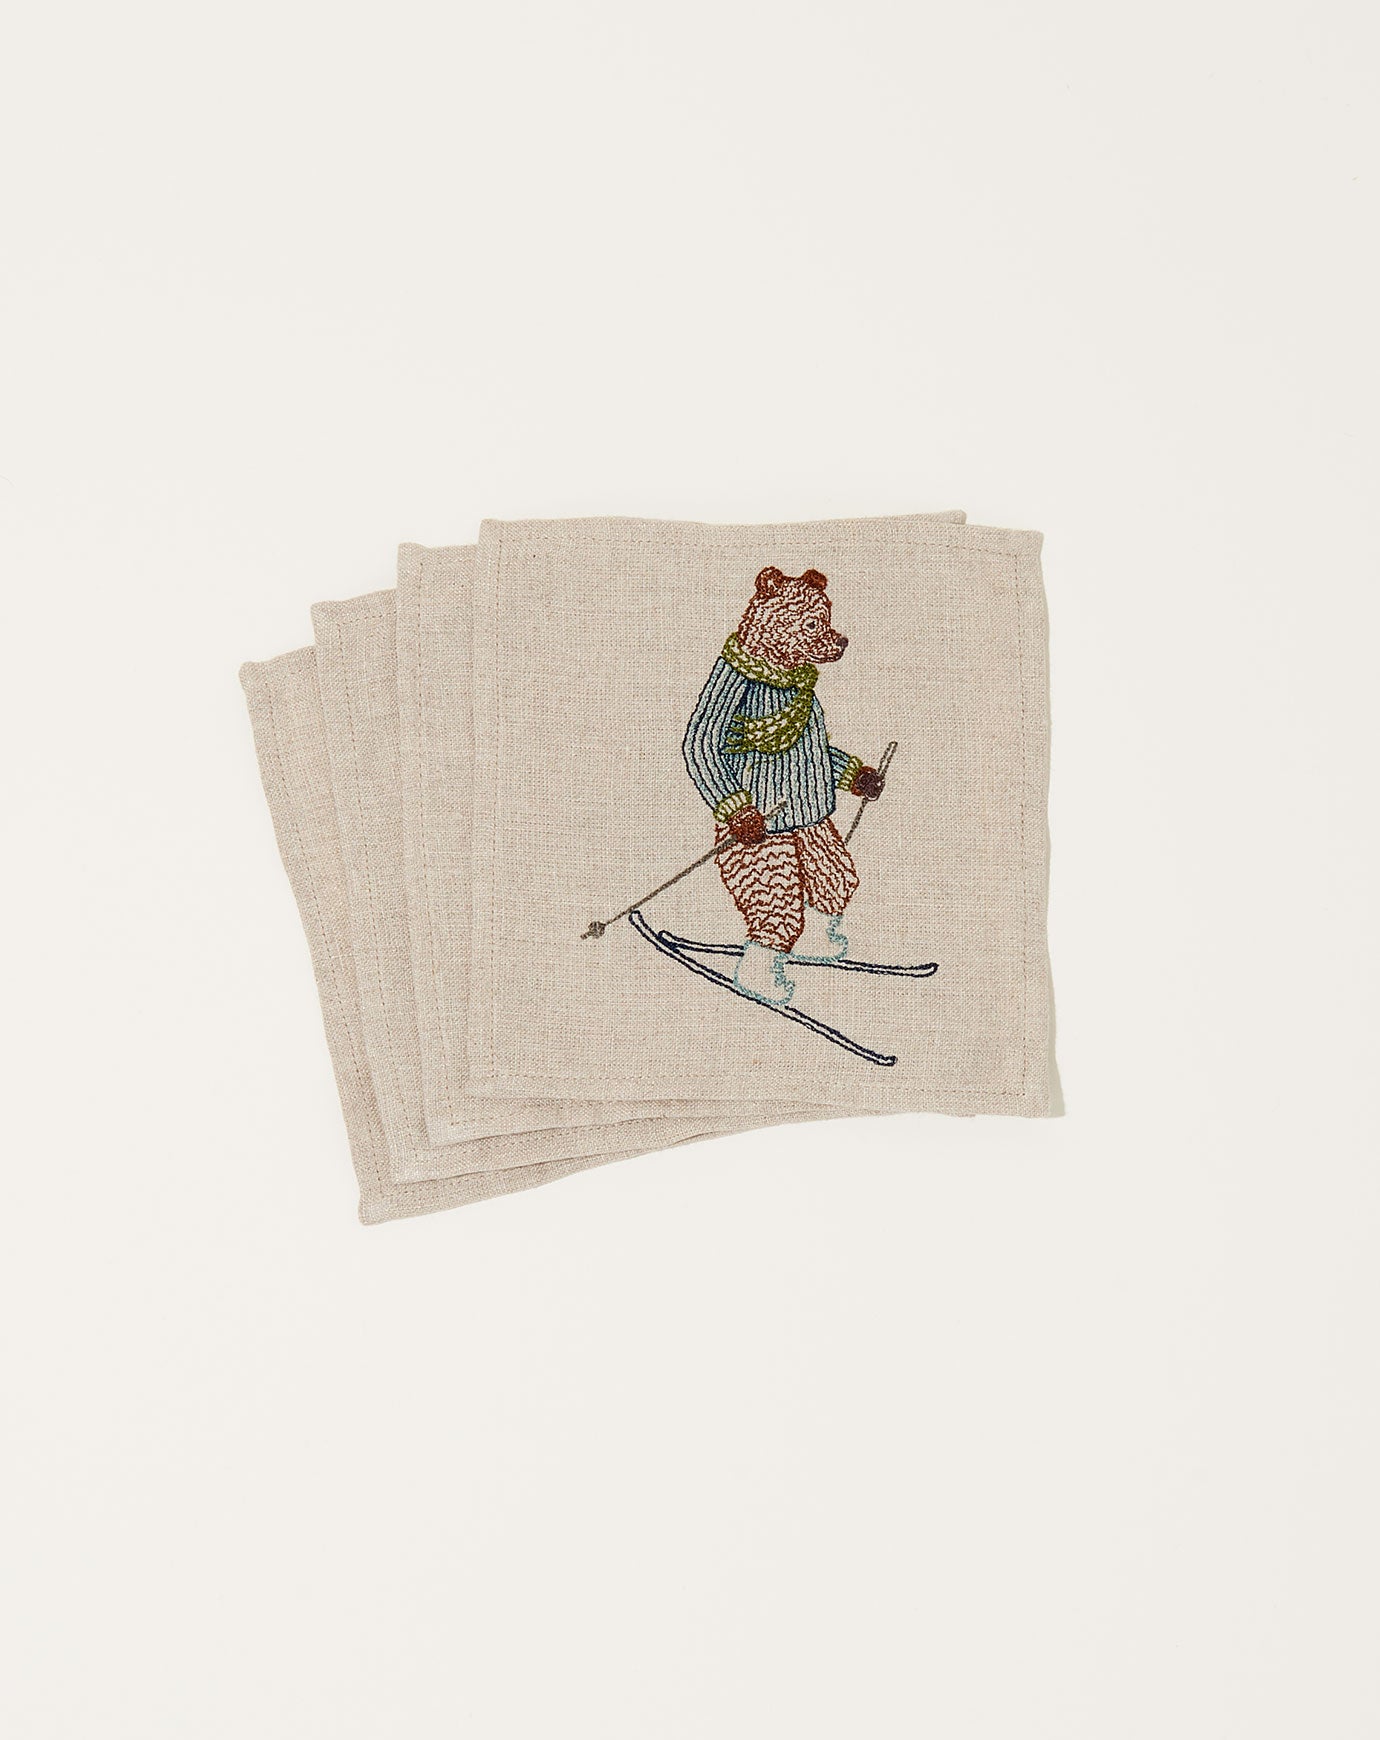 Coral & Tusk Downhill Skiers Cocktail Napkin Set